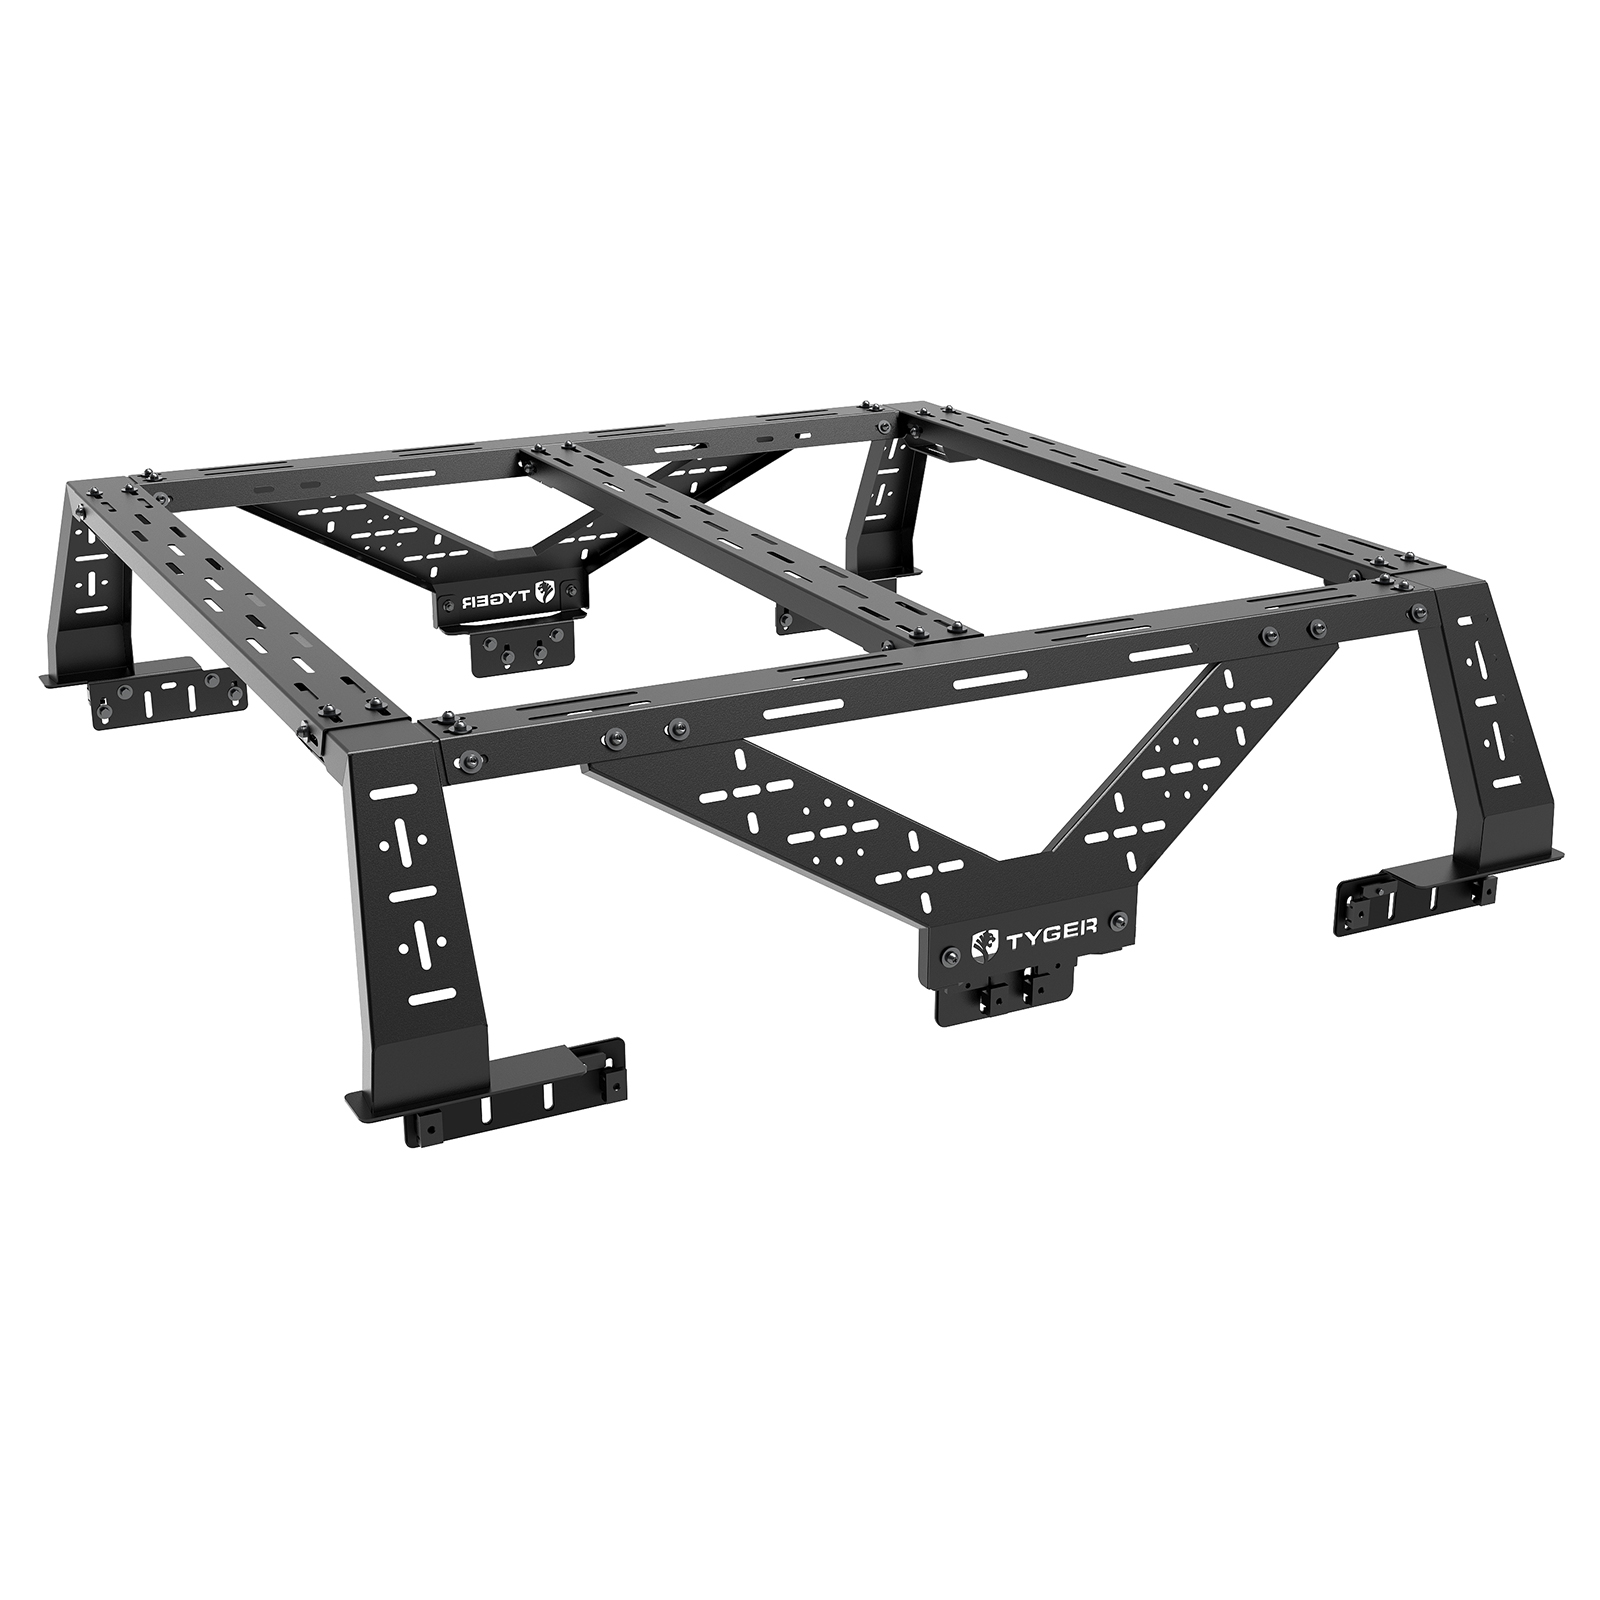 Plate Style Overland Bed Rack Fits Full-Size Pickup trucks (See Image for Fitment) | TG-BK2U55637